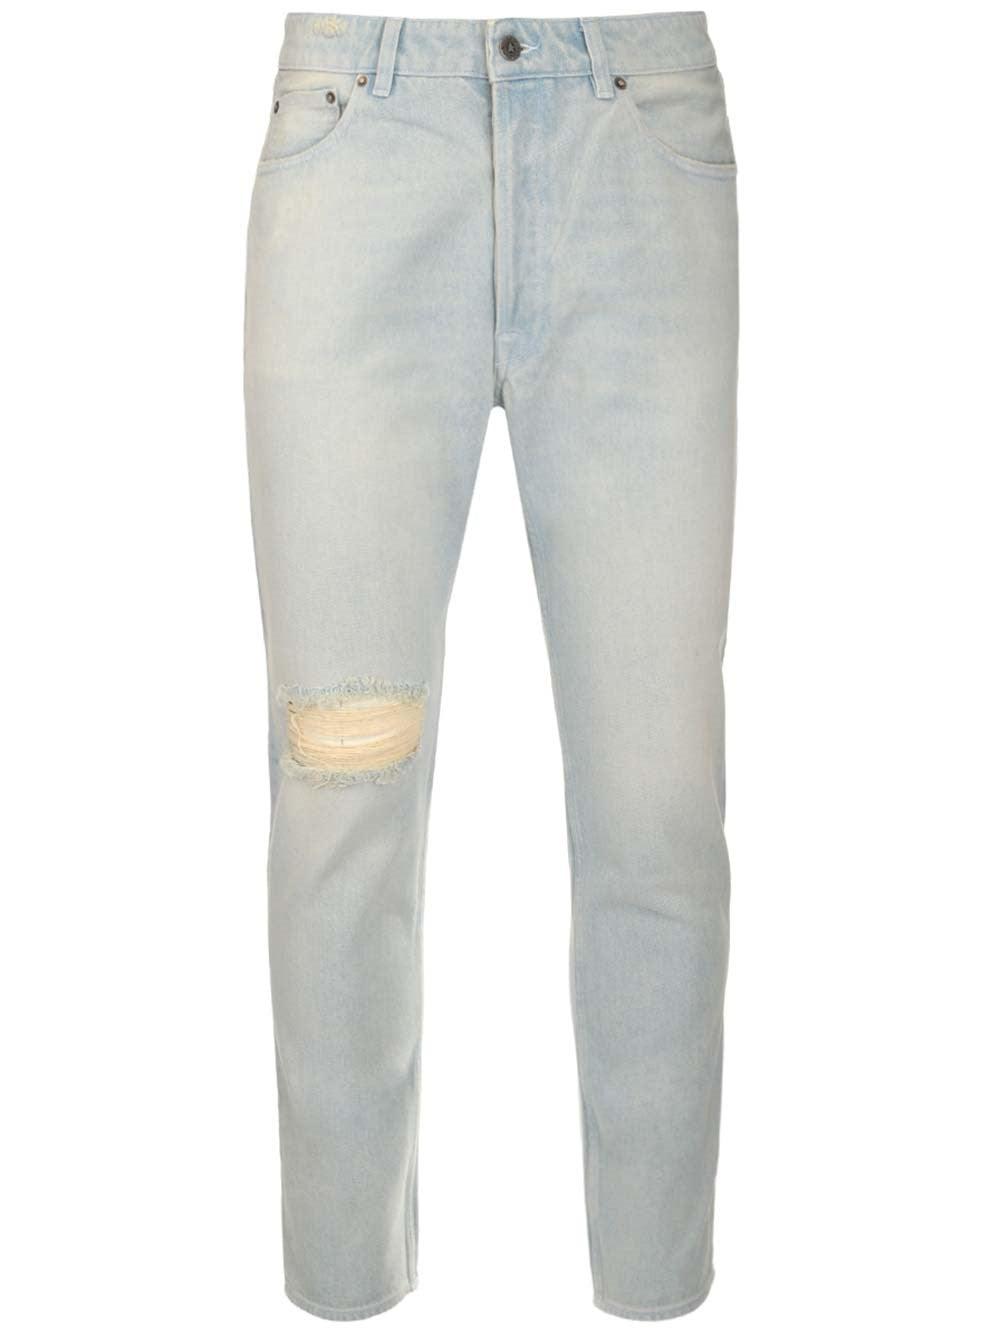 GOLDEN GOOSE DISTRESSED LOGO PATCH JEANS